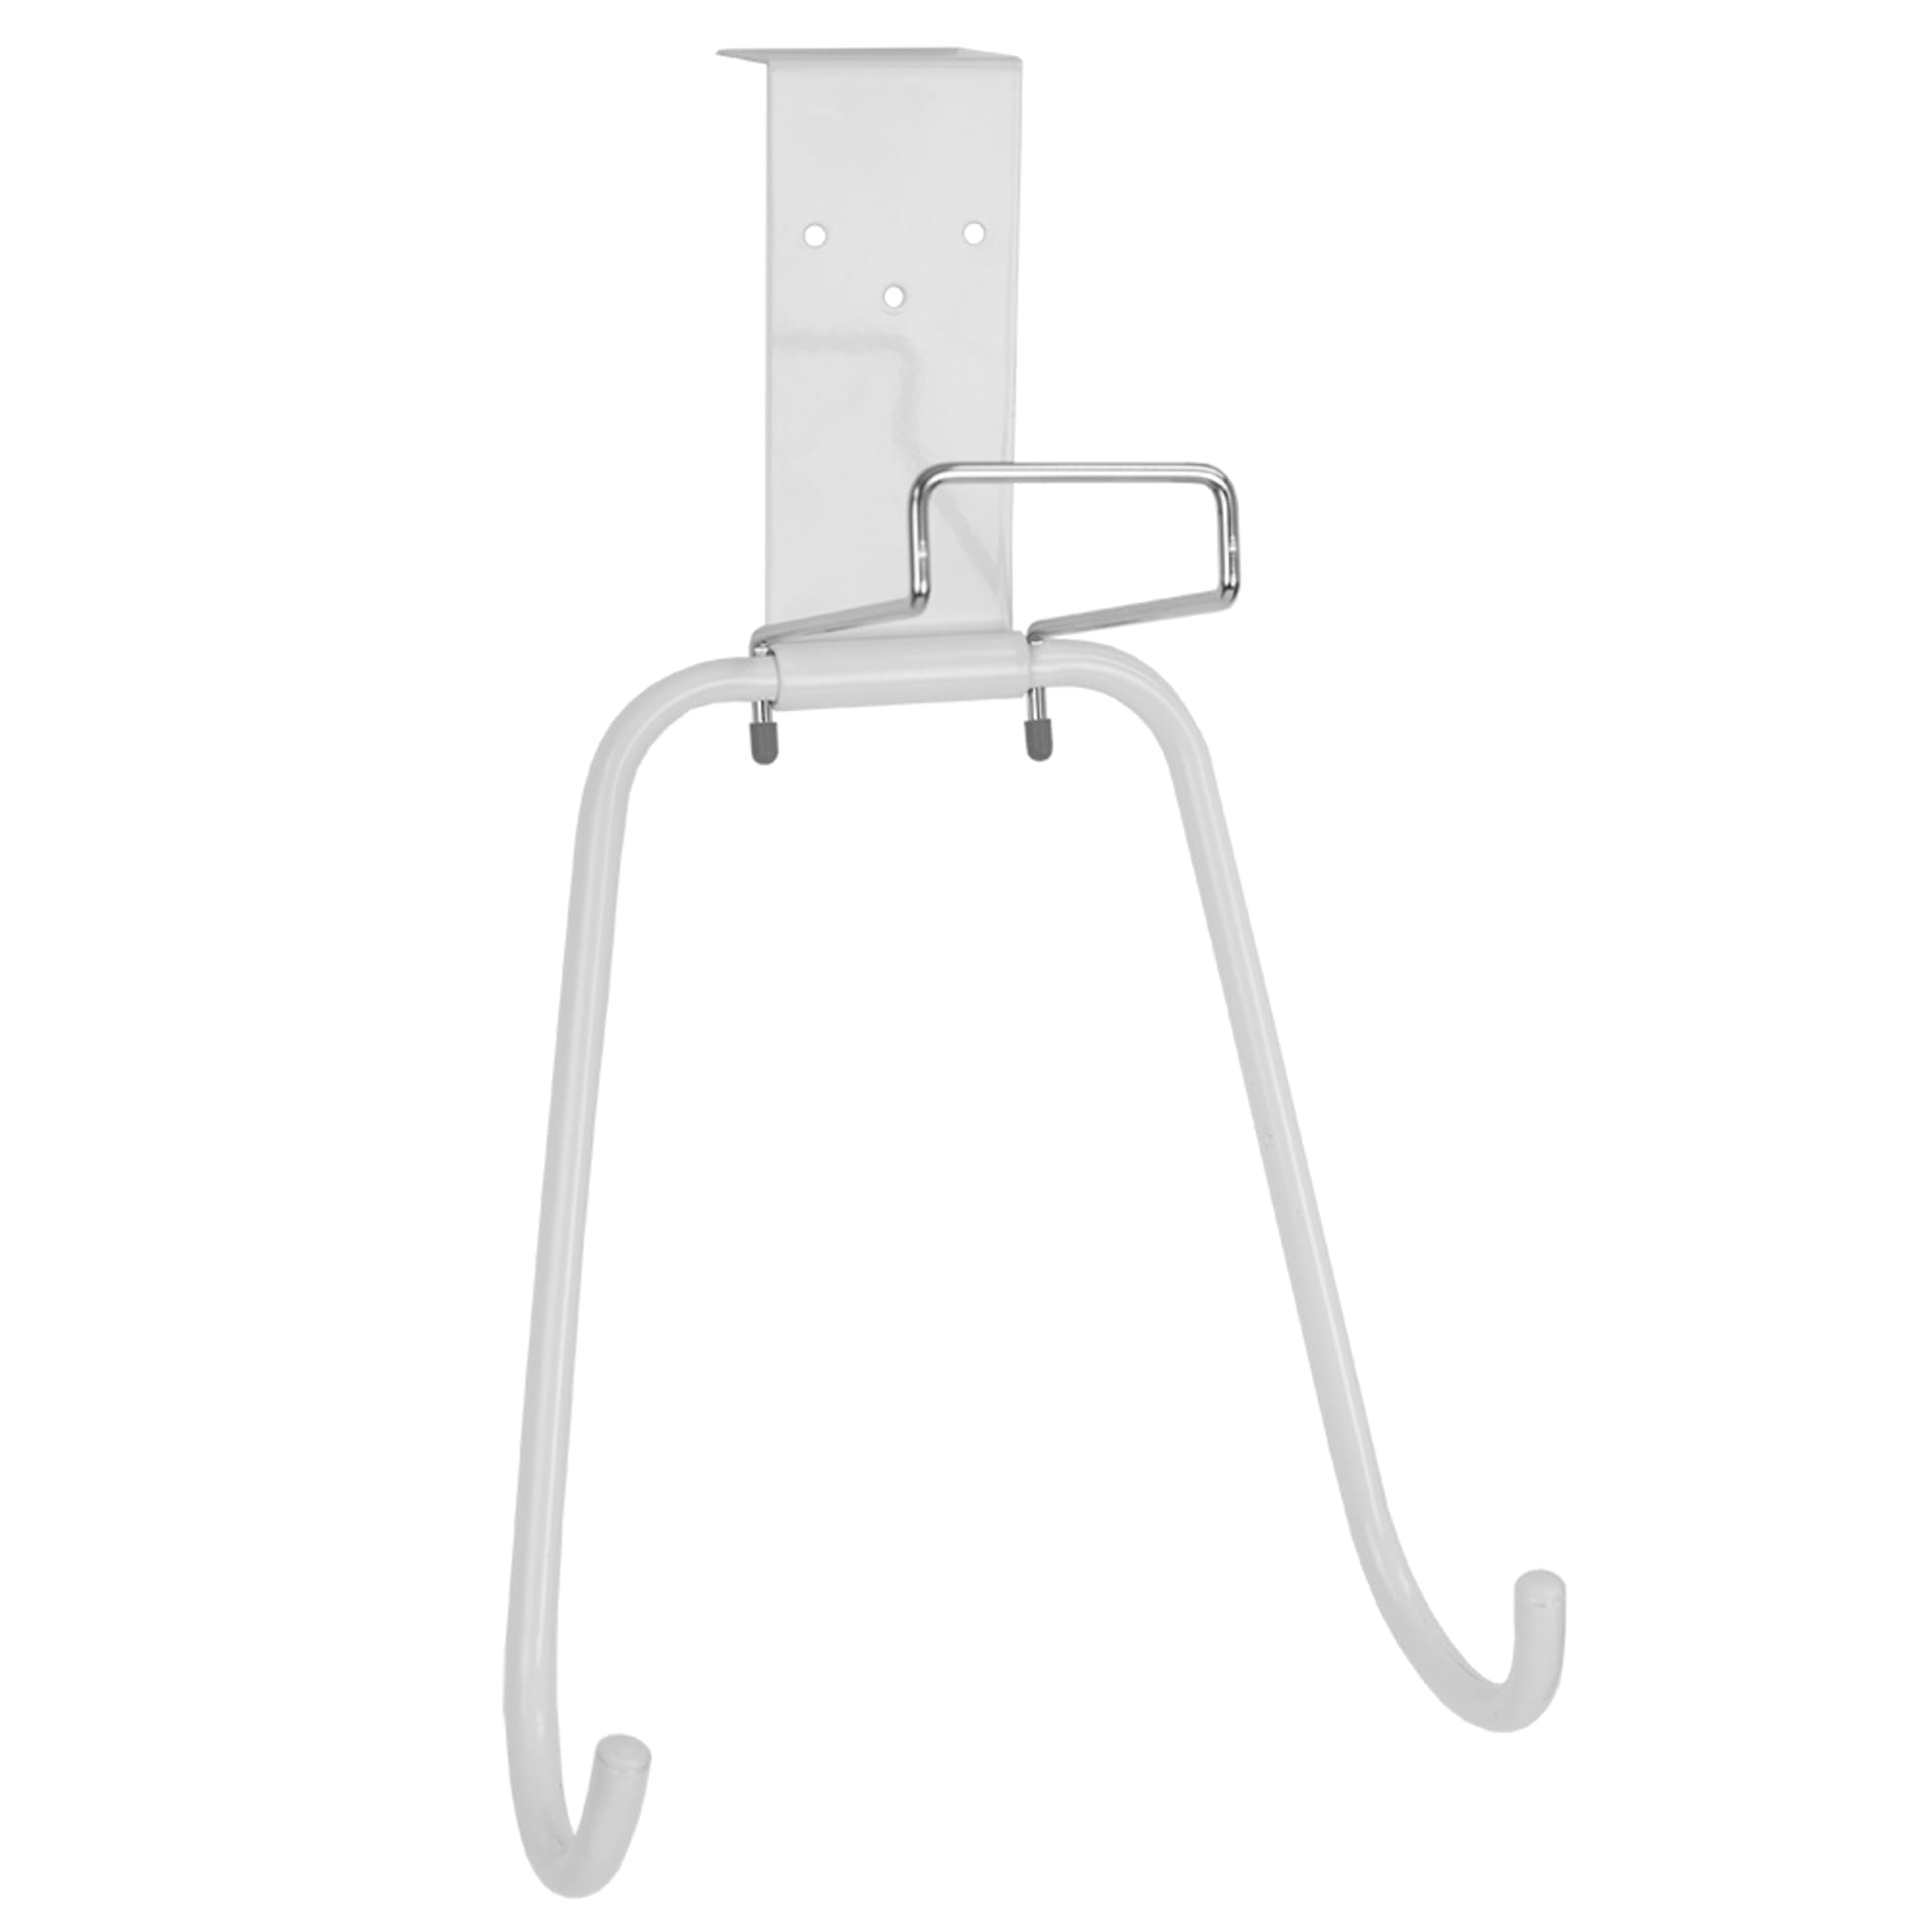 Home Basics Vinyl Coated Steel Ironing Board Holder with Steel Iron Rest, White $5 EACH, CASE PACK OF 12